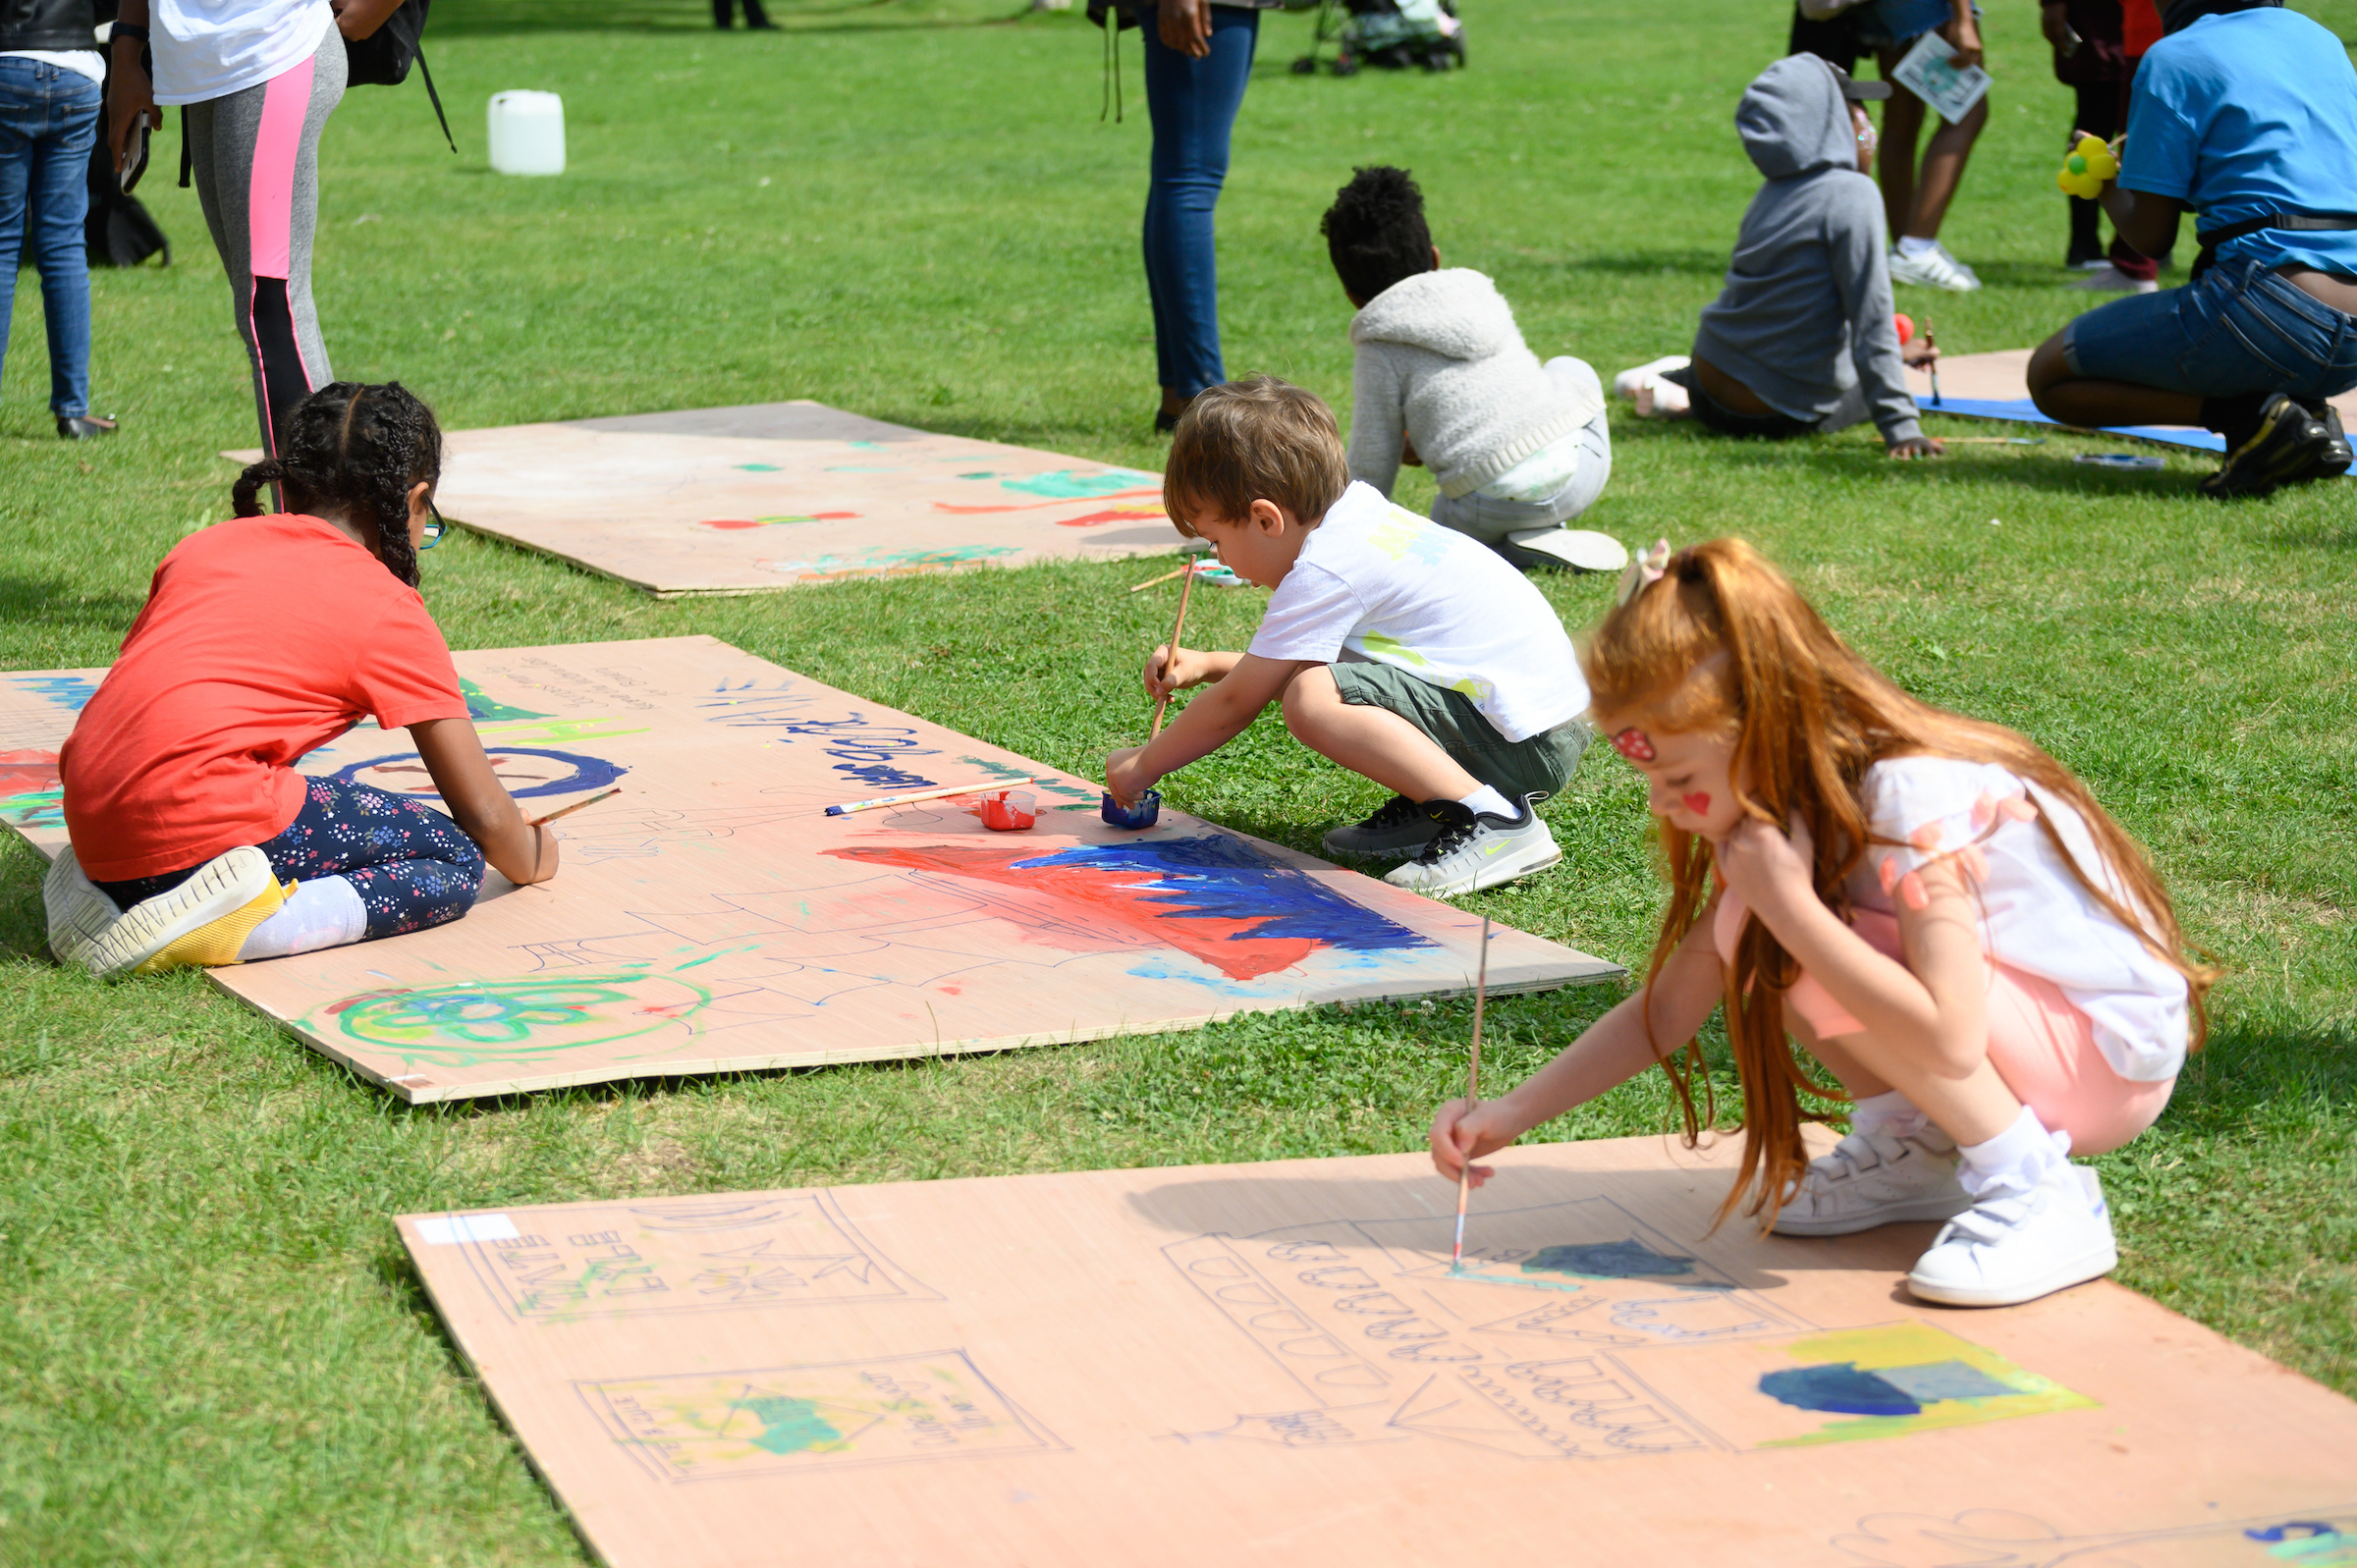 Children painting on boards